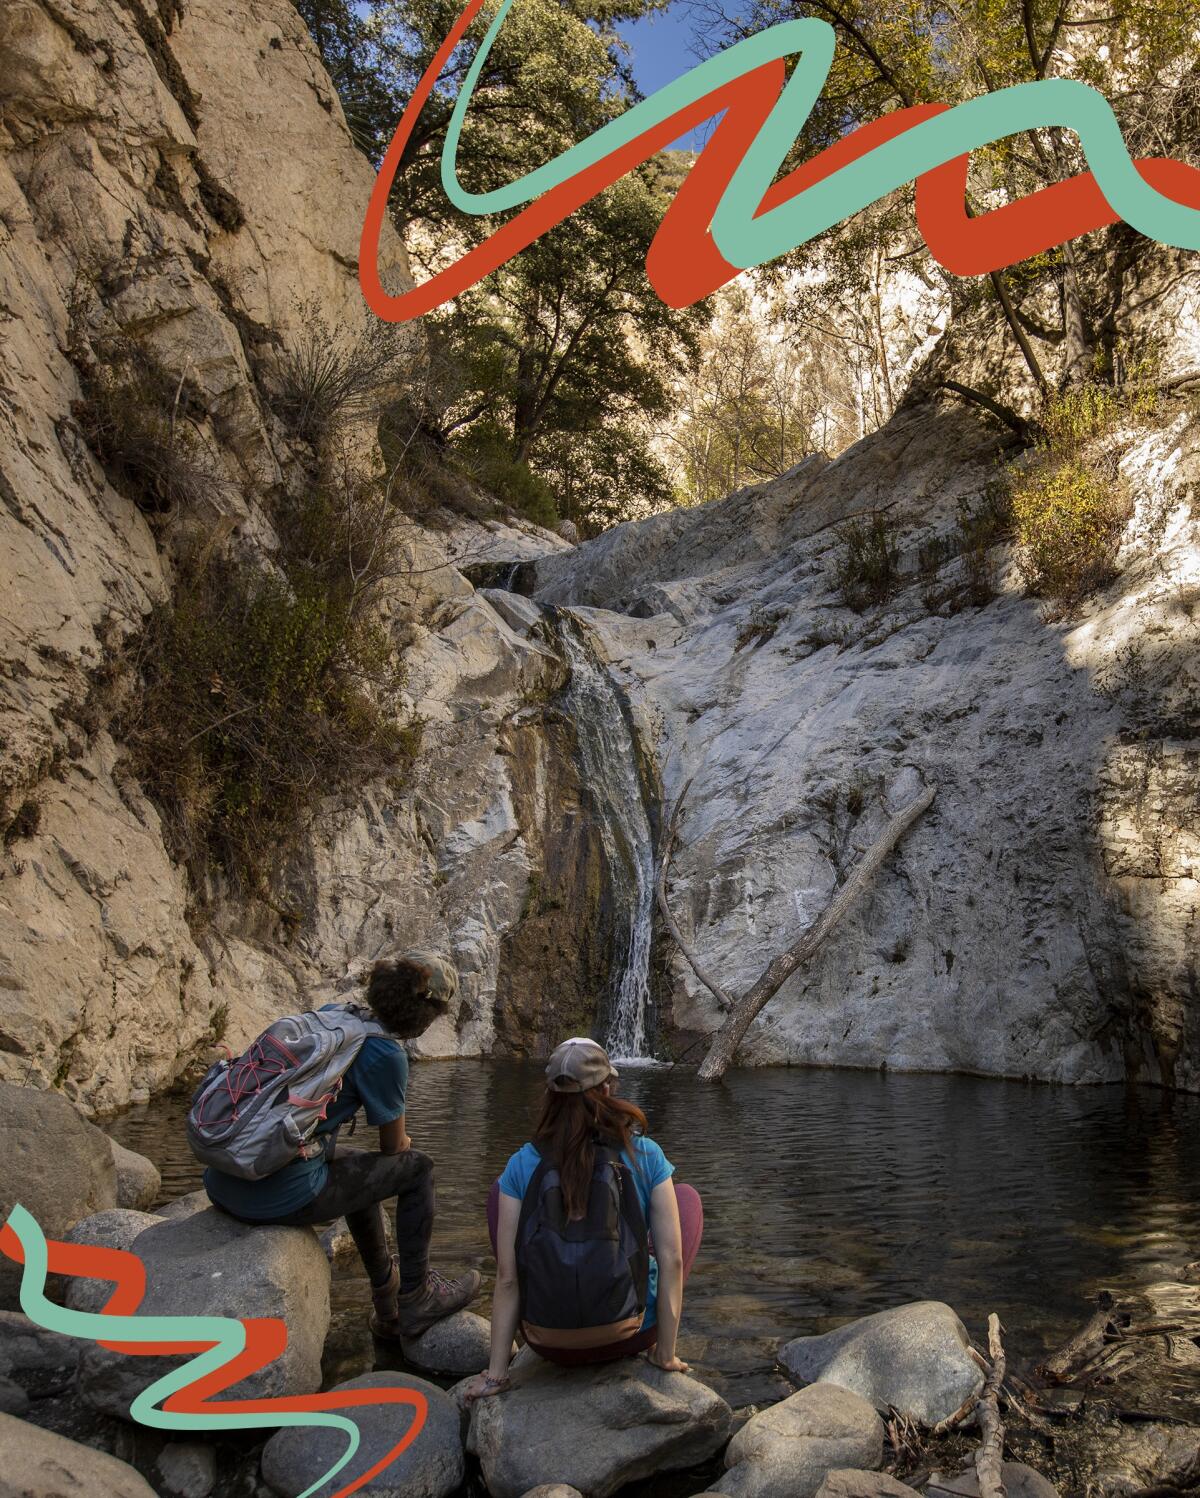 Hikers enjoy the view at lower Switzer Falls in Angeles National Forest.